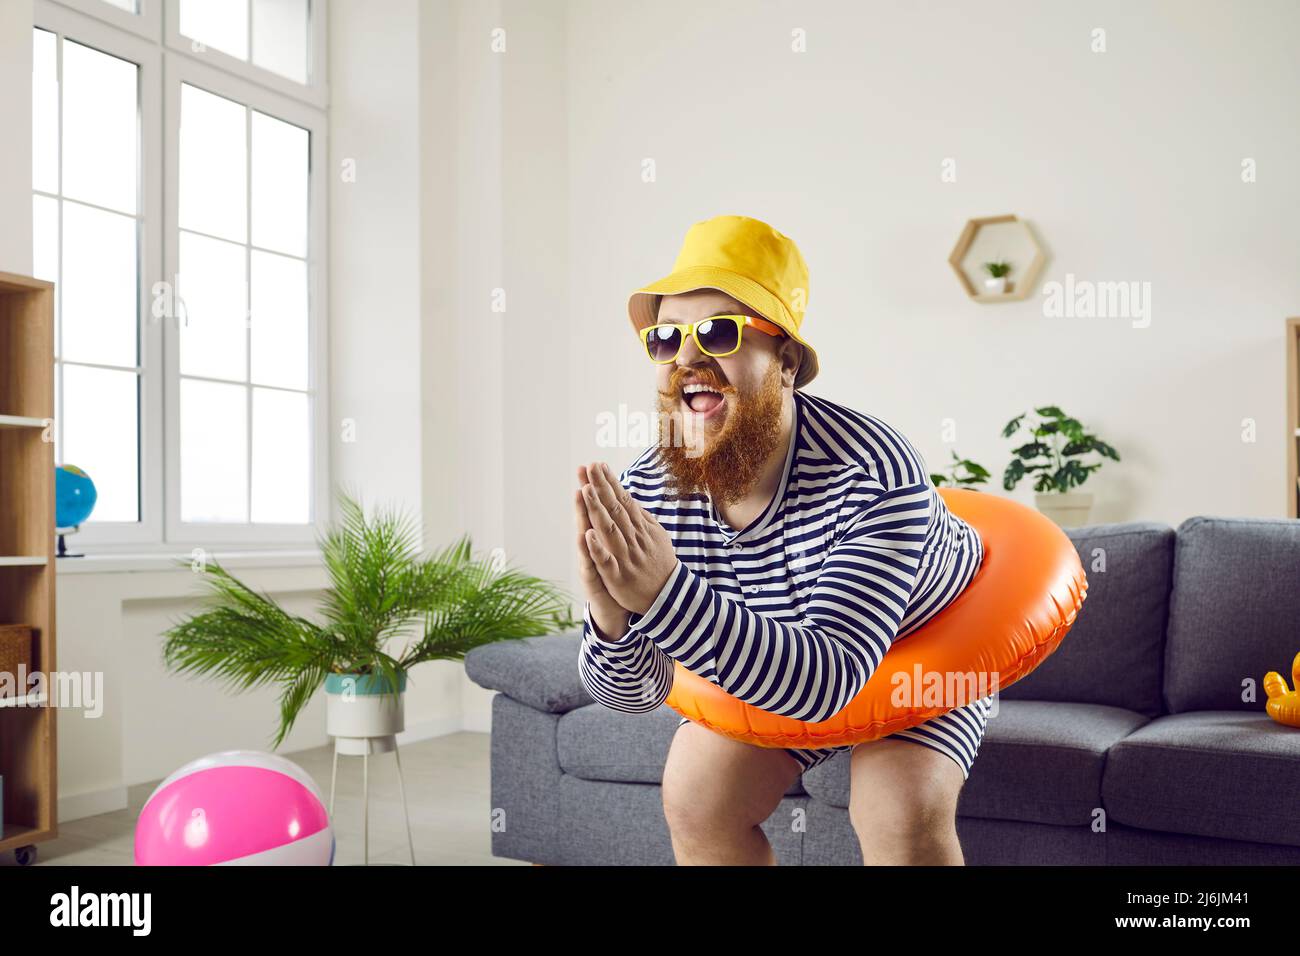 Funny crazy man with inflatable circle pretends to be swimming at home in living room. Stock Photo